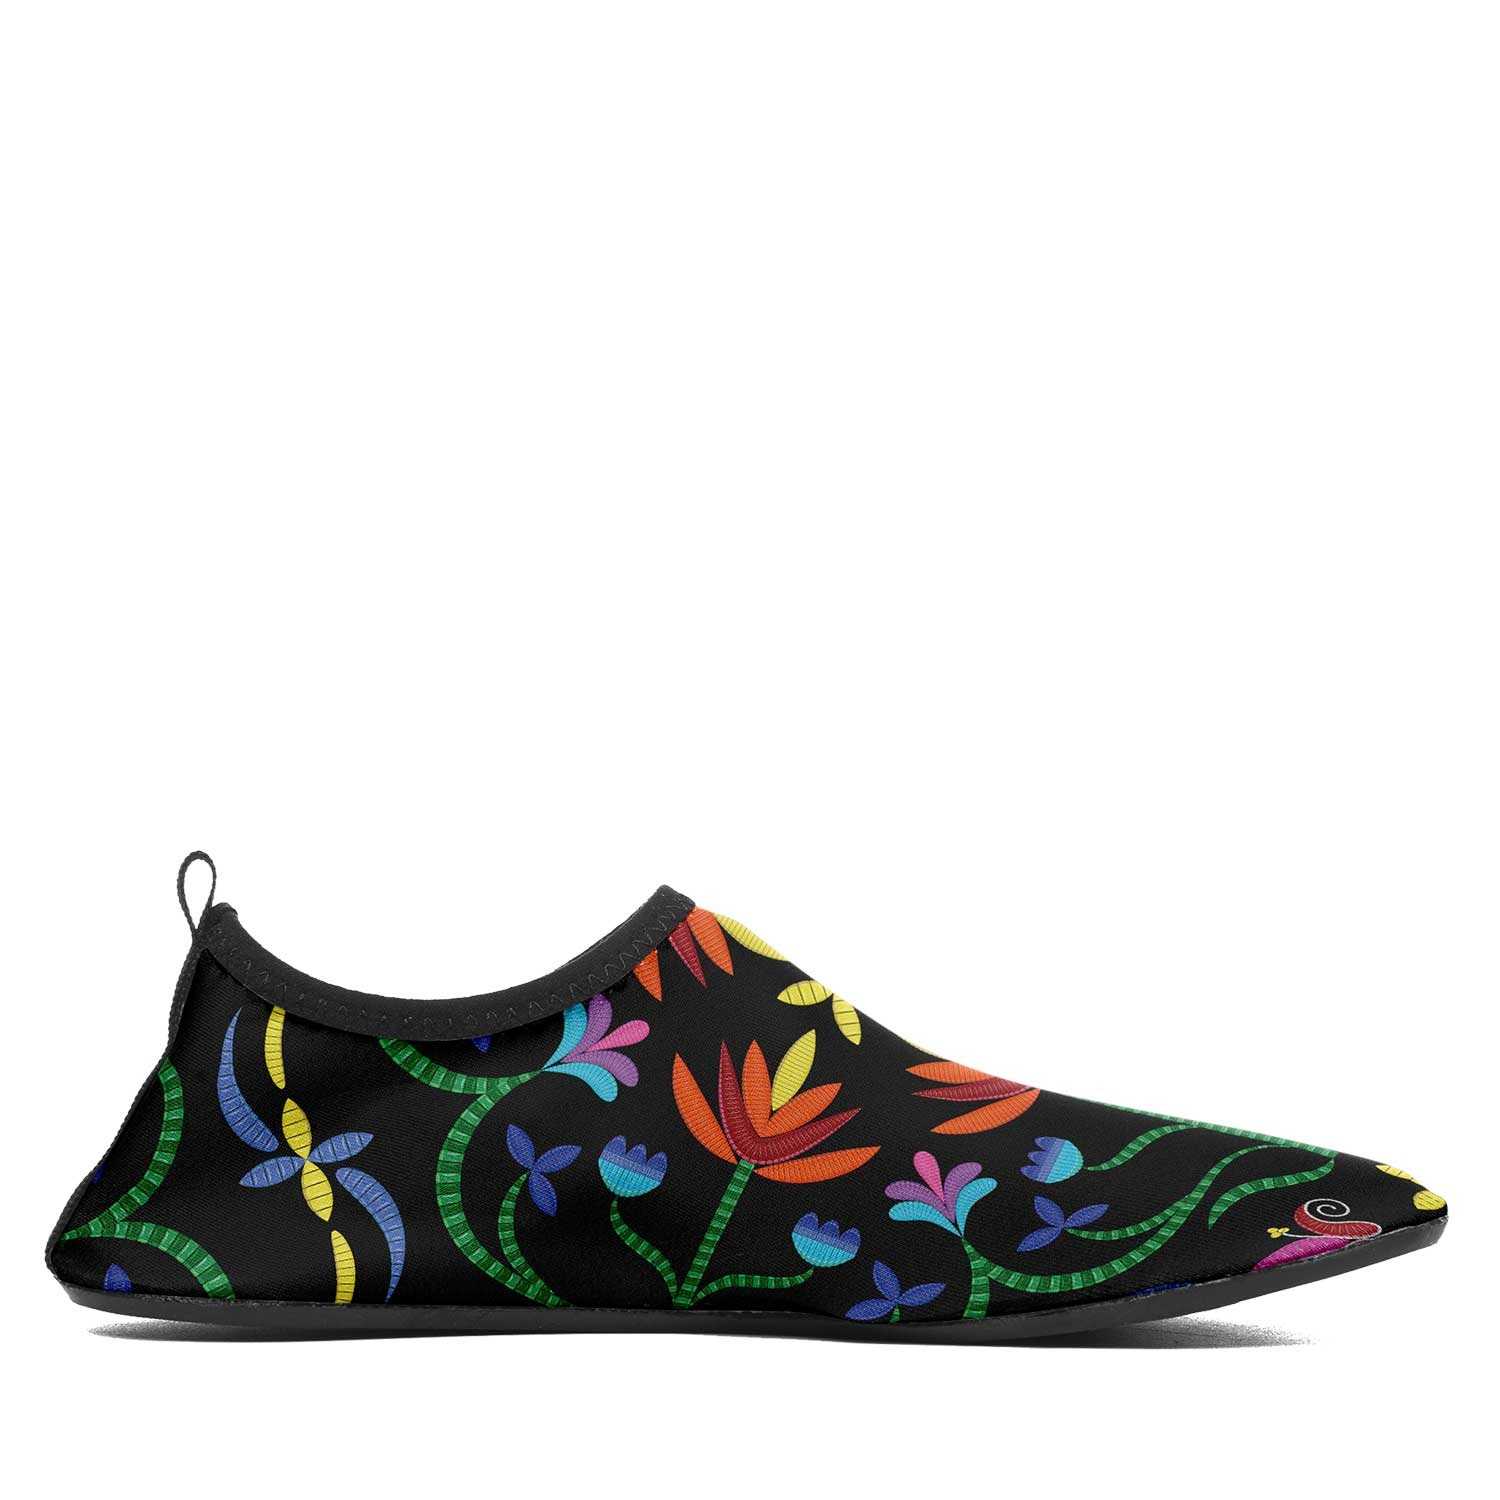 Quill Visions Kid's Sockamoccs Slip On Shoes